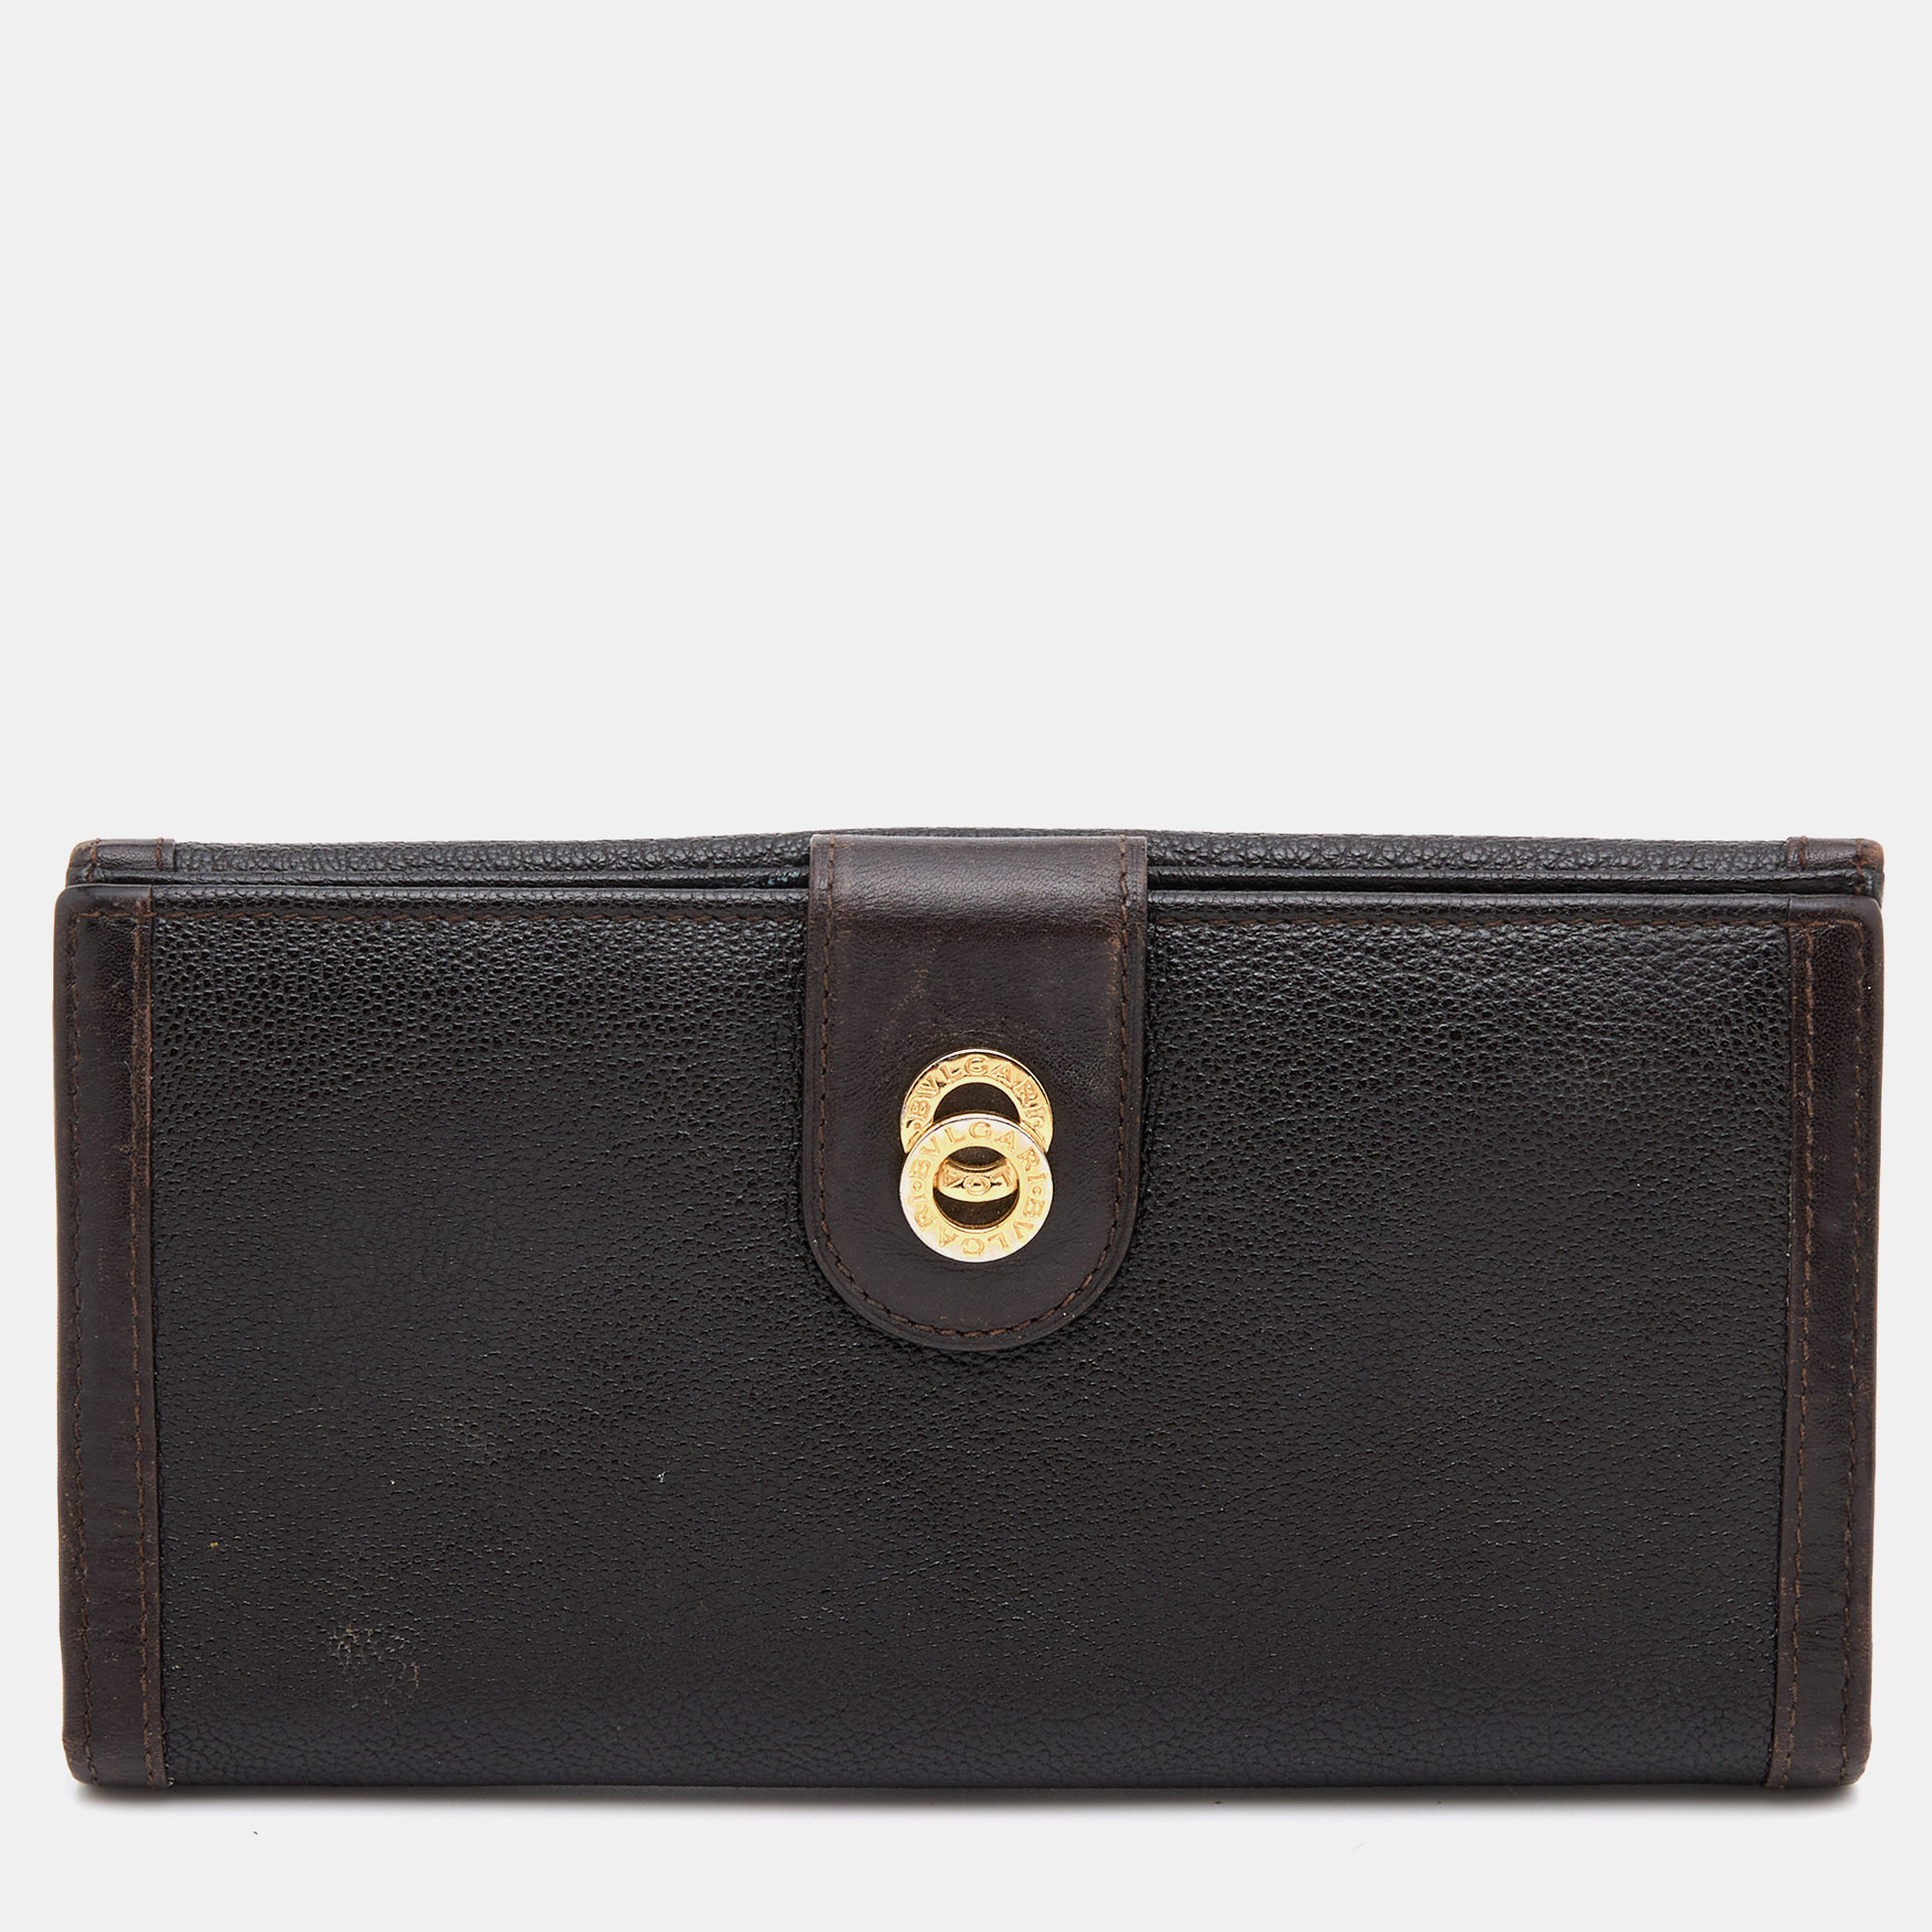 Pre-owned Bvlgari Dark Brown Leather Flap Continental Wallet